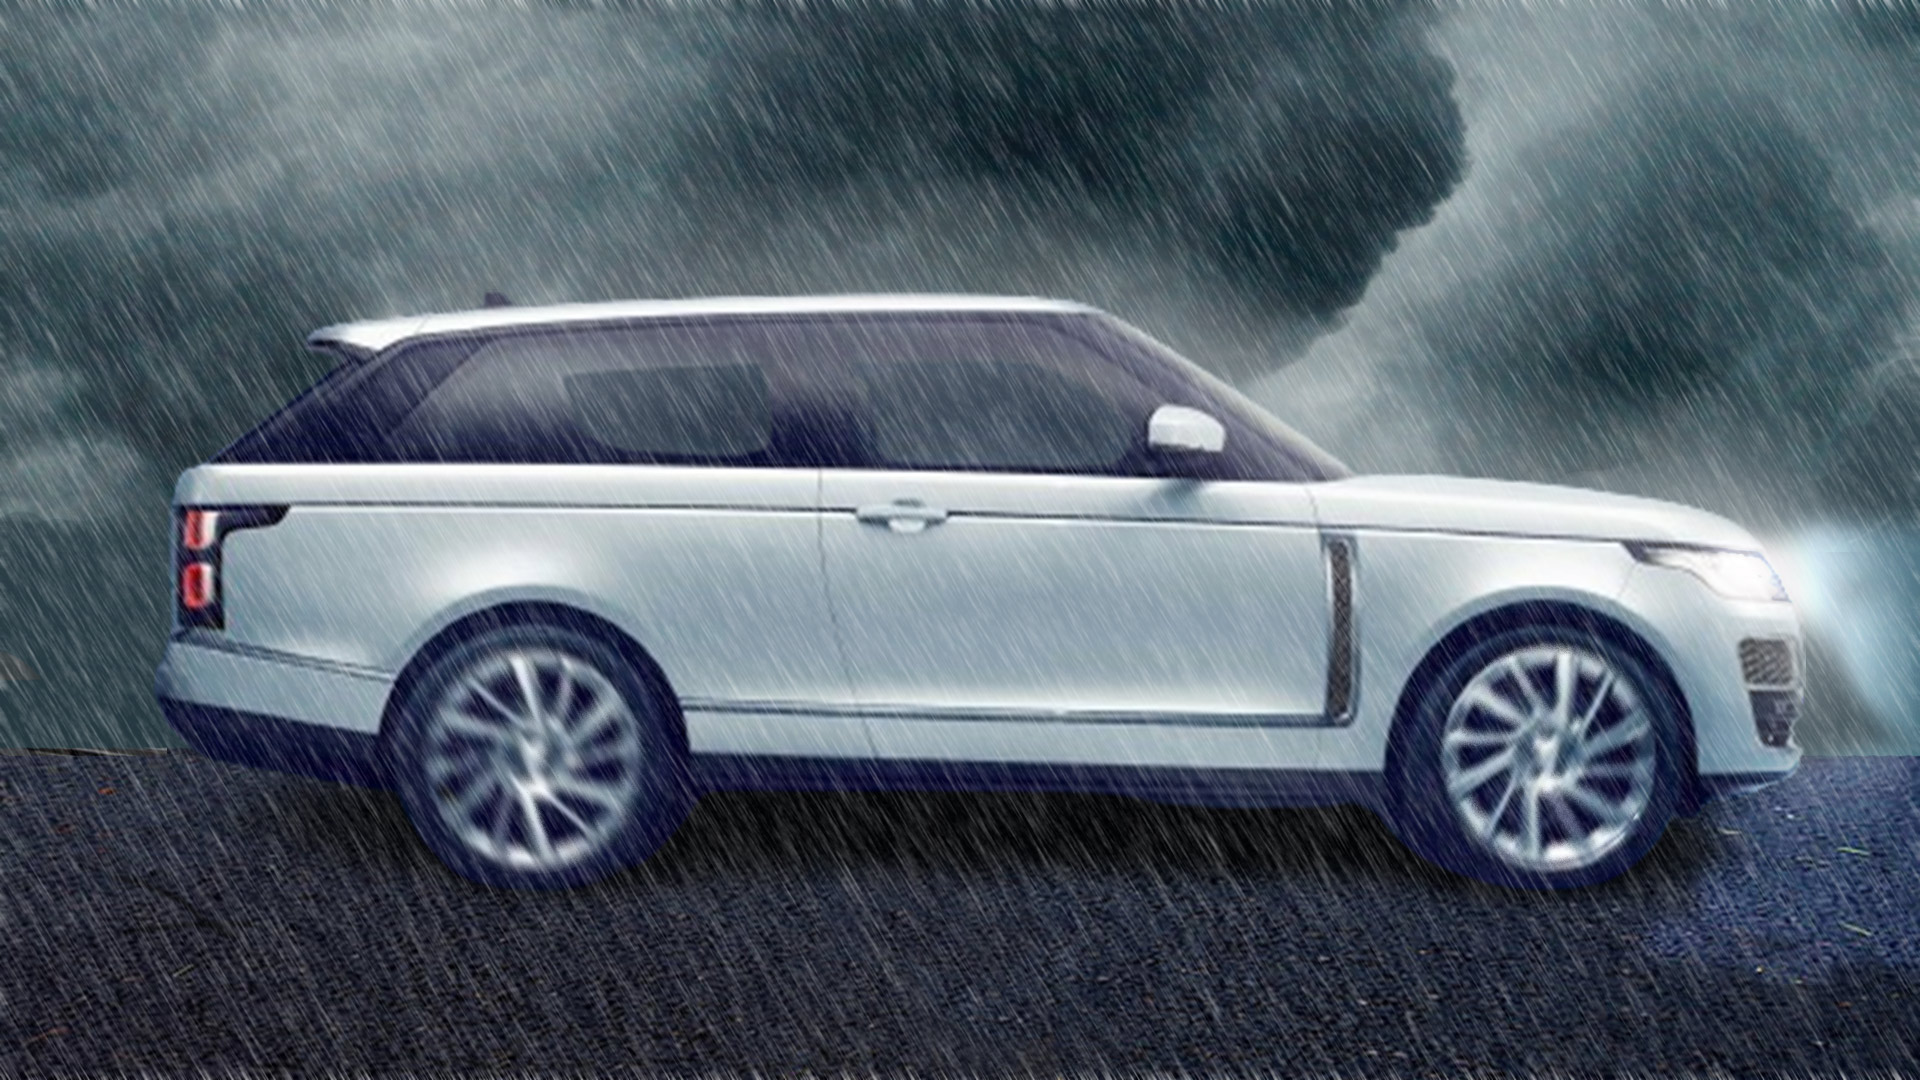 White range rover driving in a hail storm with dark ominous storm clouds